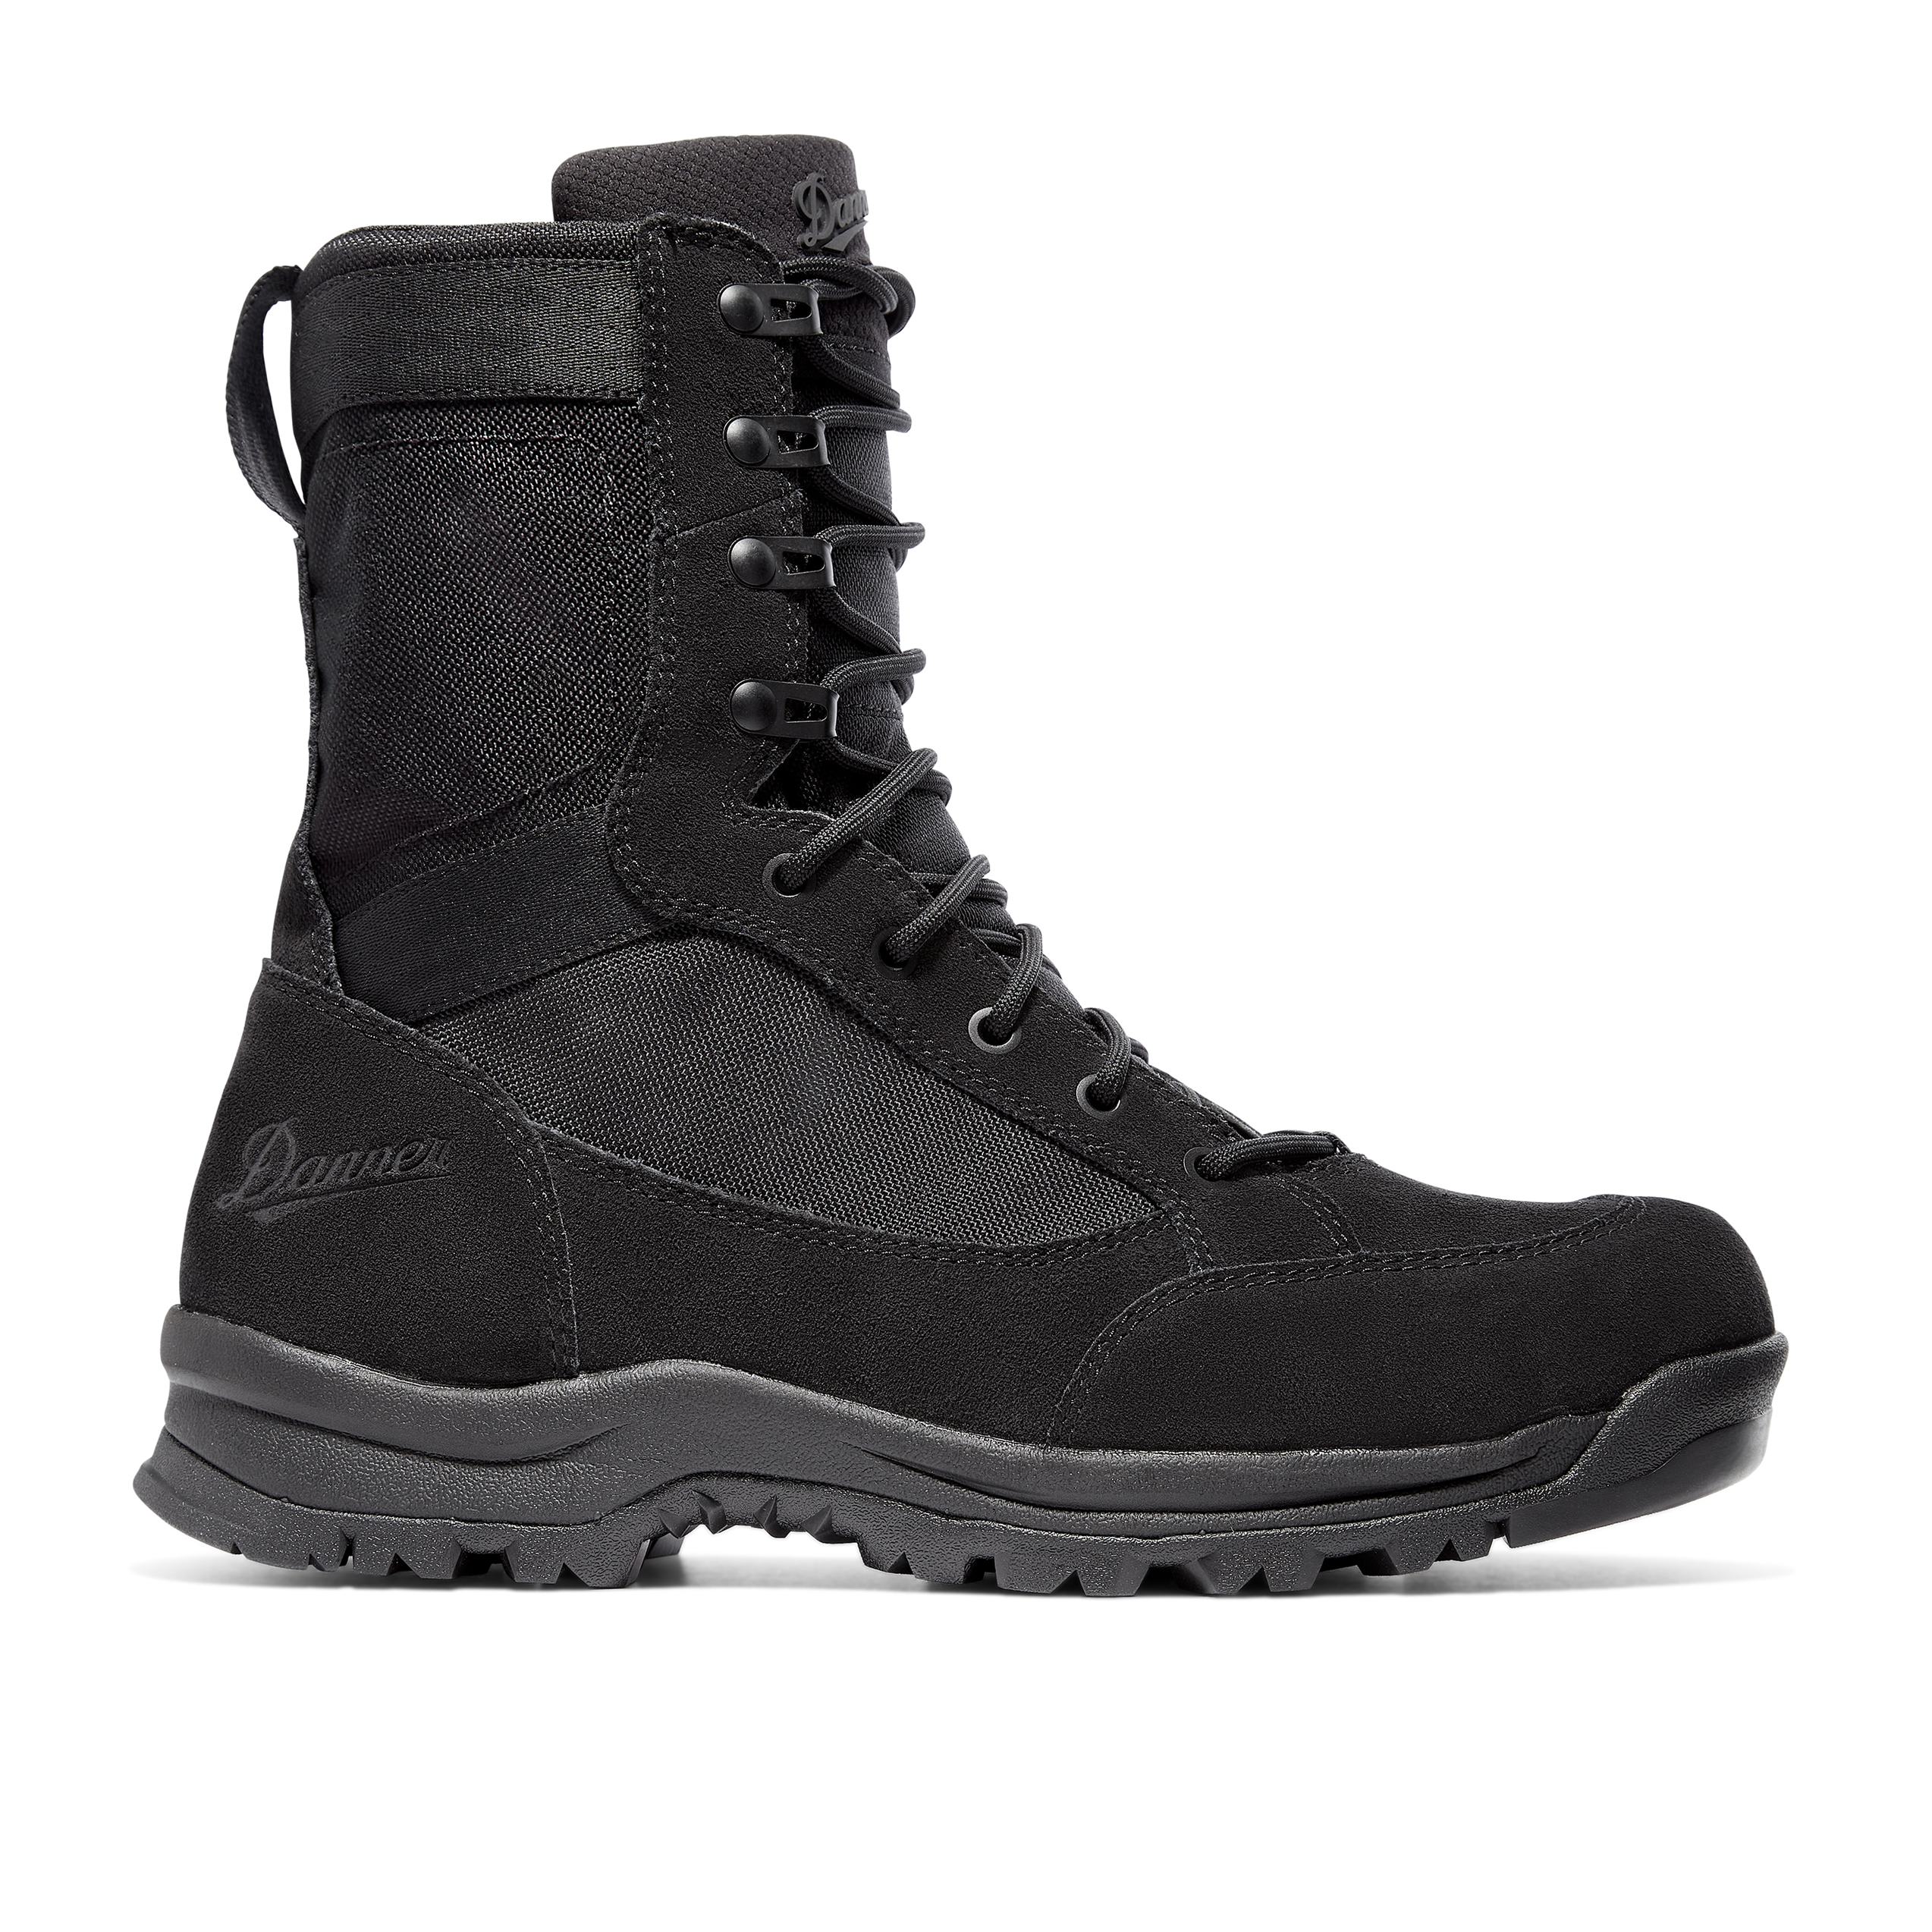 Danner 007 60th Tanicus - Black | Hiking Boots | Huckberry